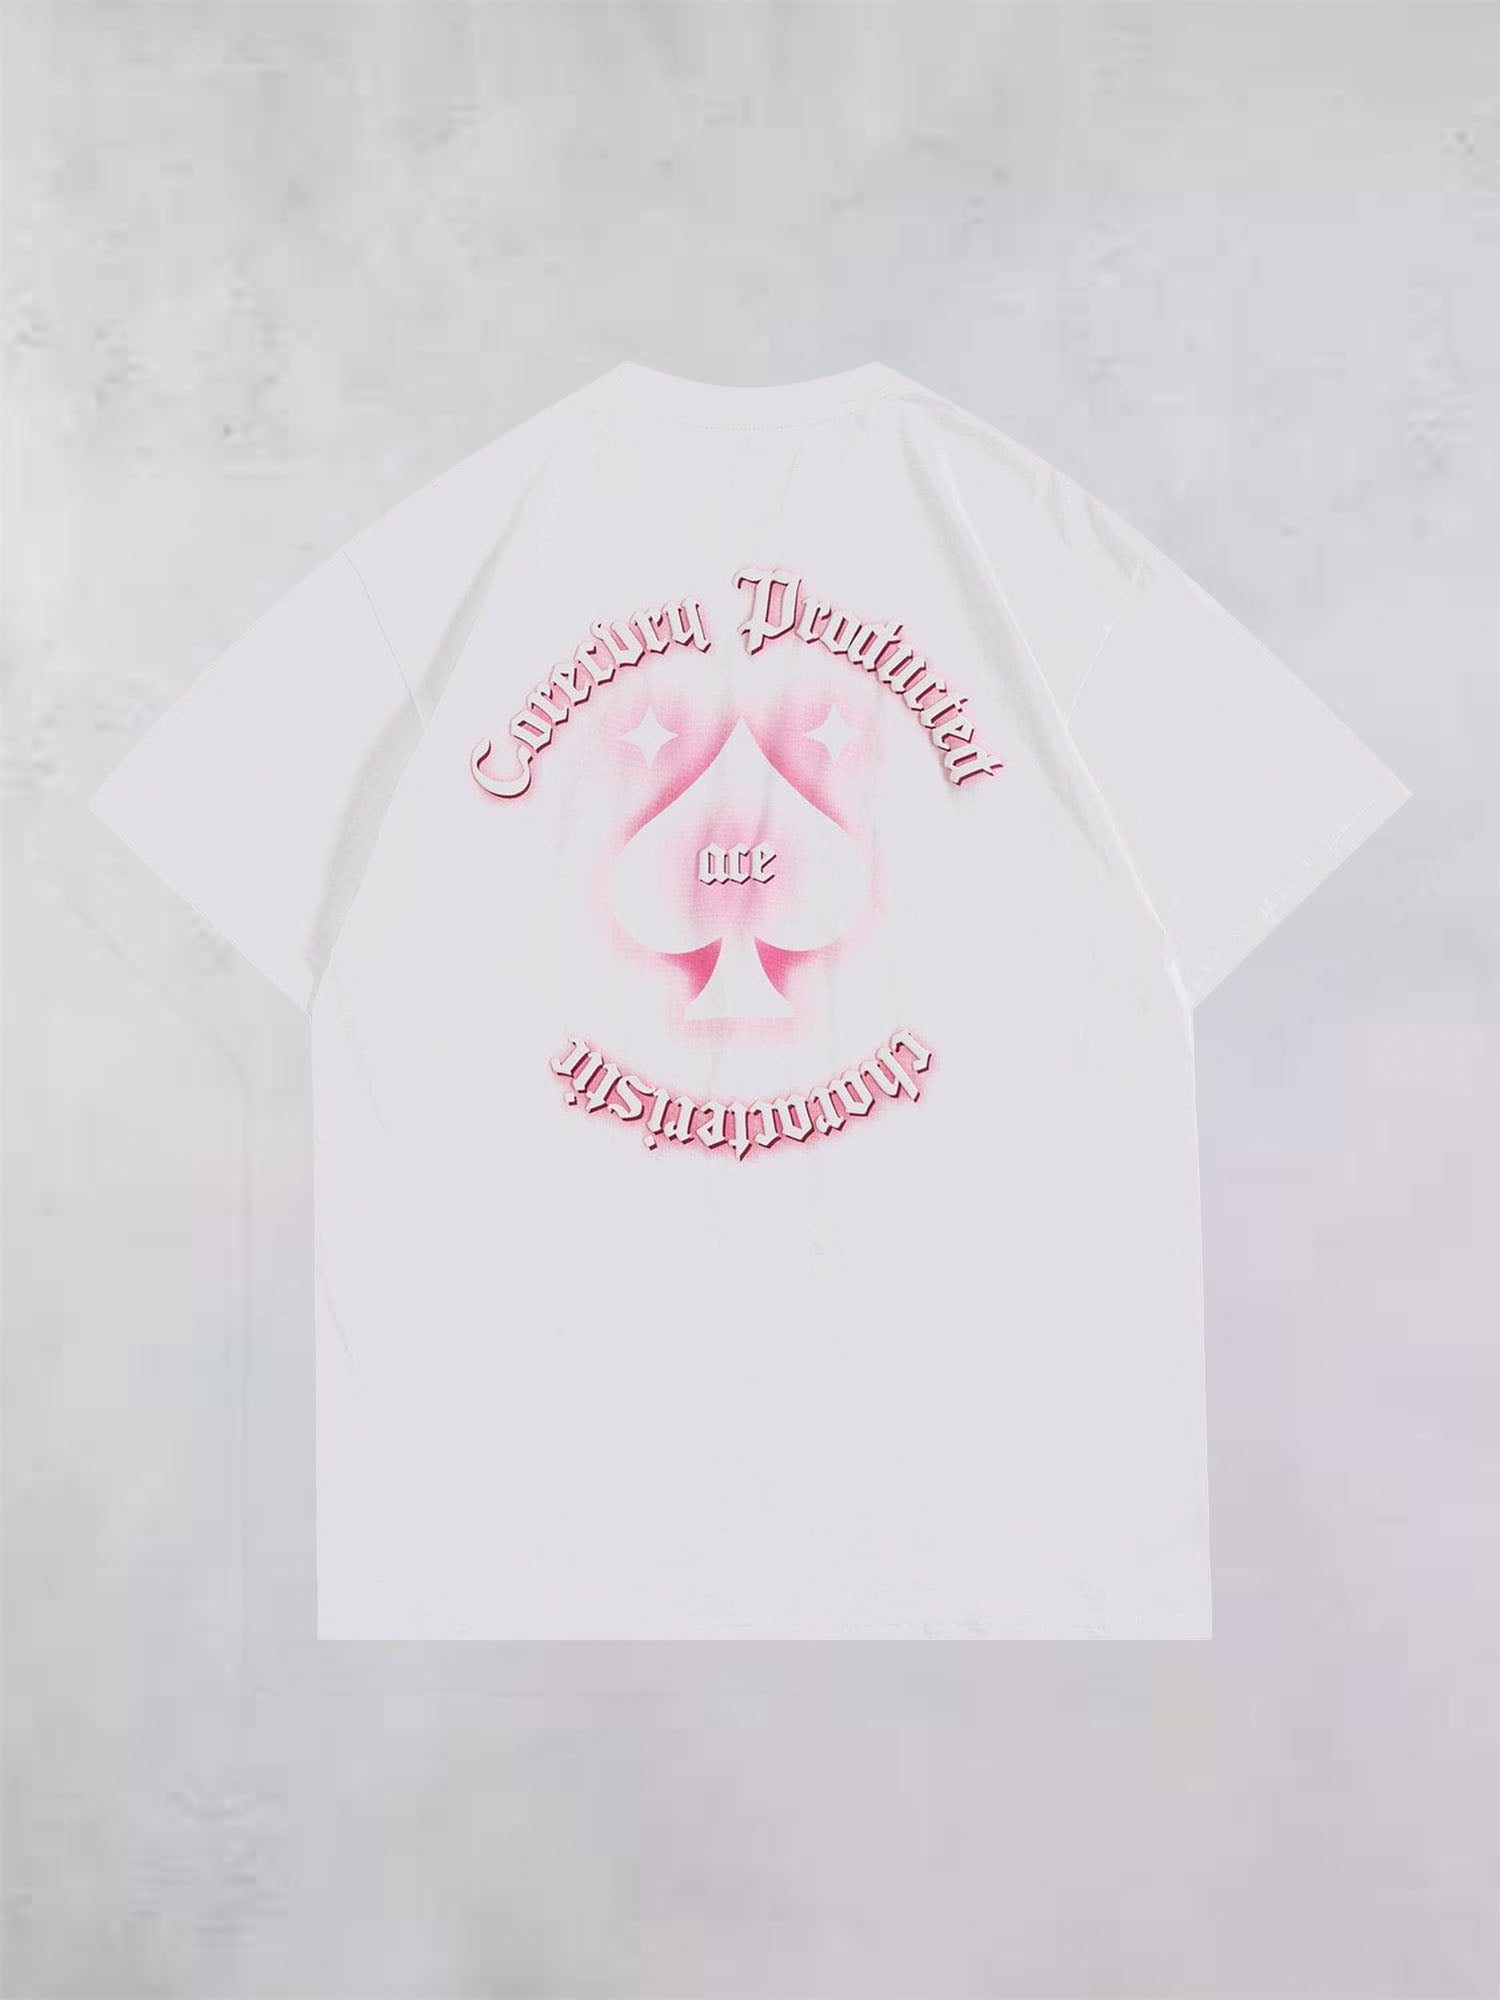 JUSTNOTAG Hearts Letter Graphic Short Sleeve Tee